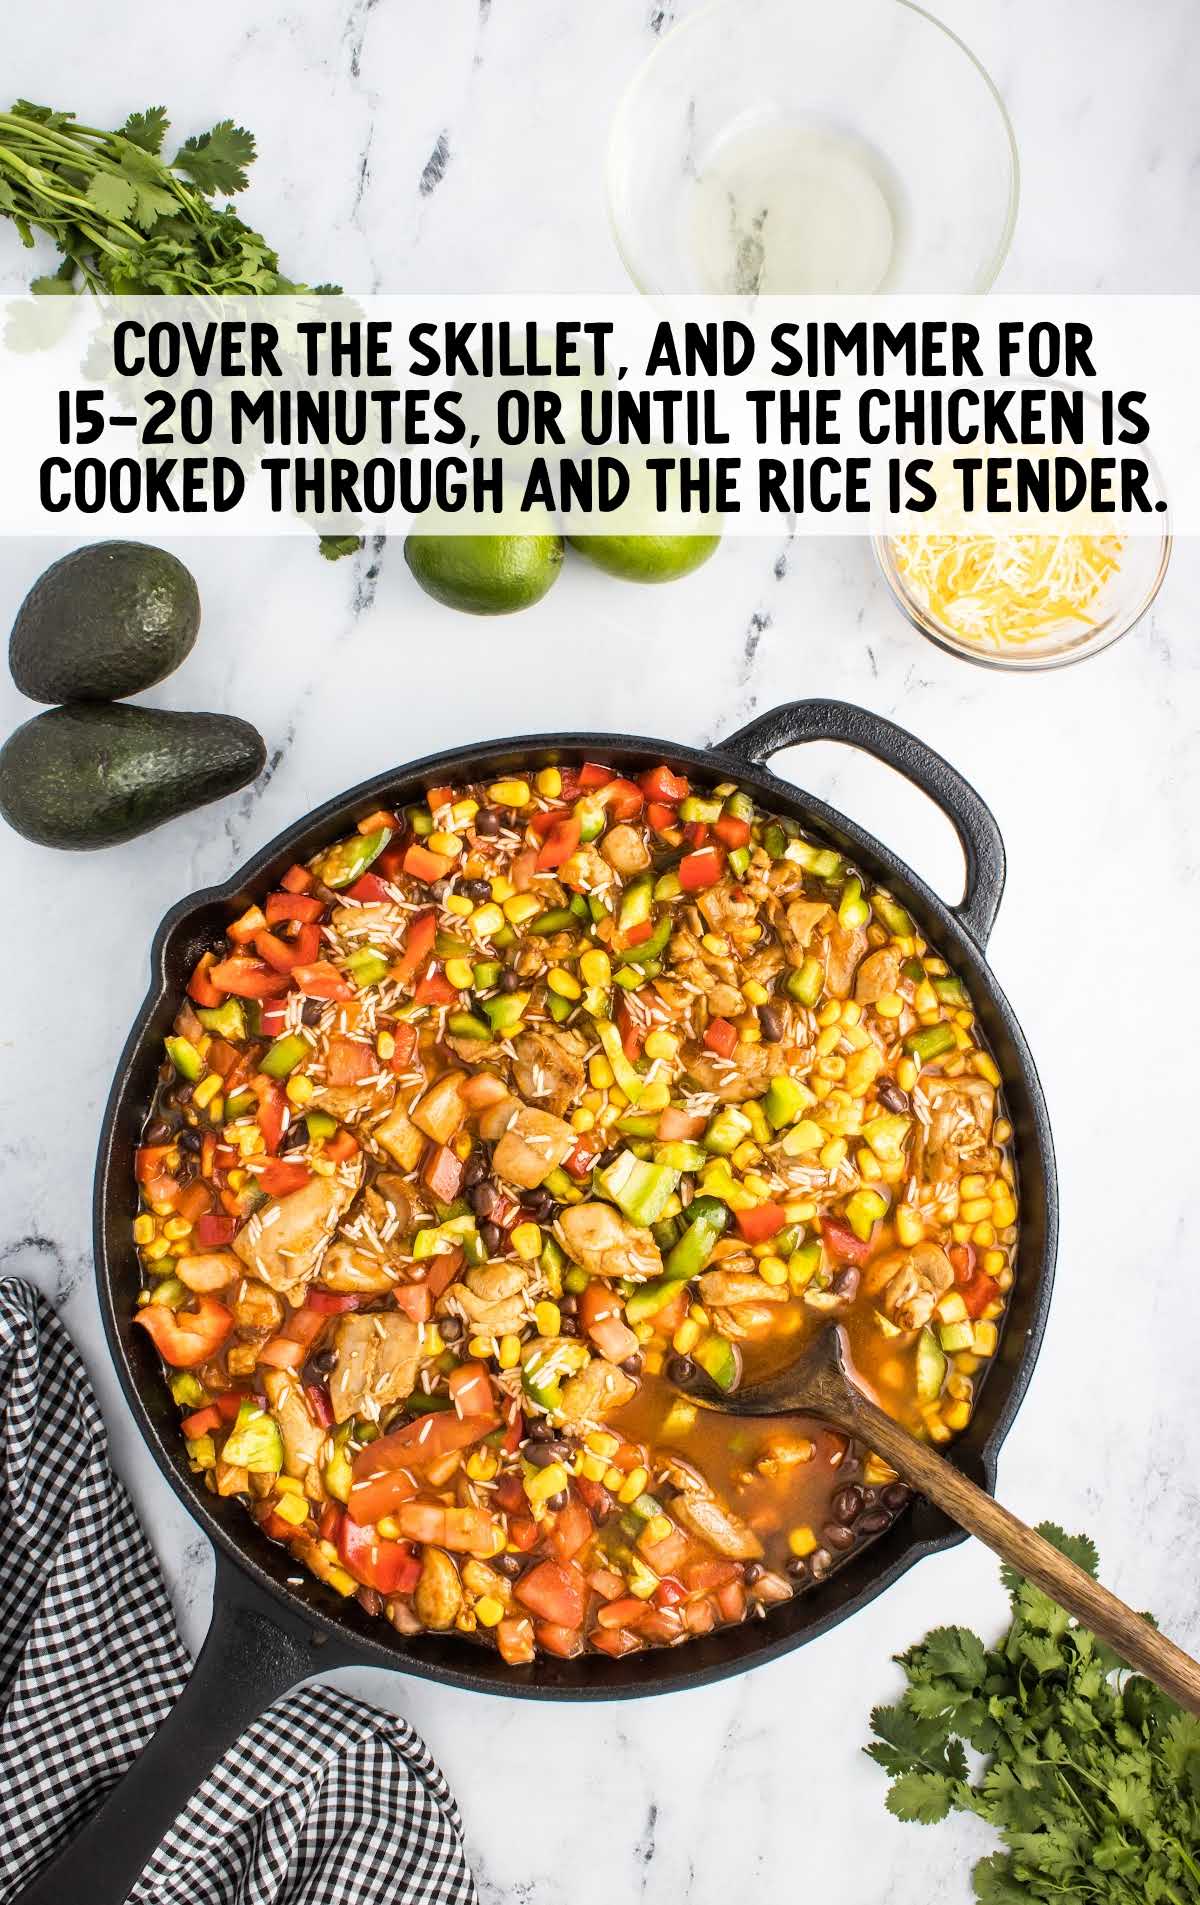 skillet covered and simmered for 15-20 minutes